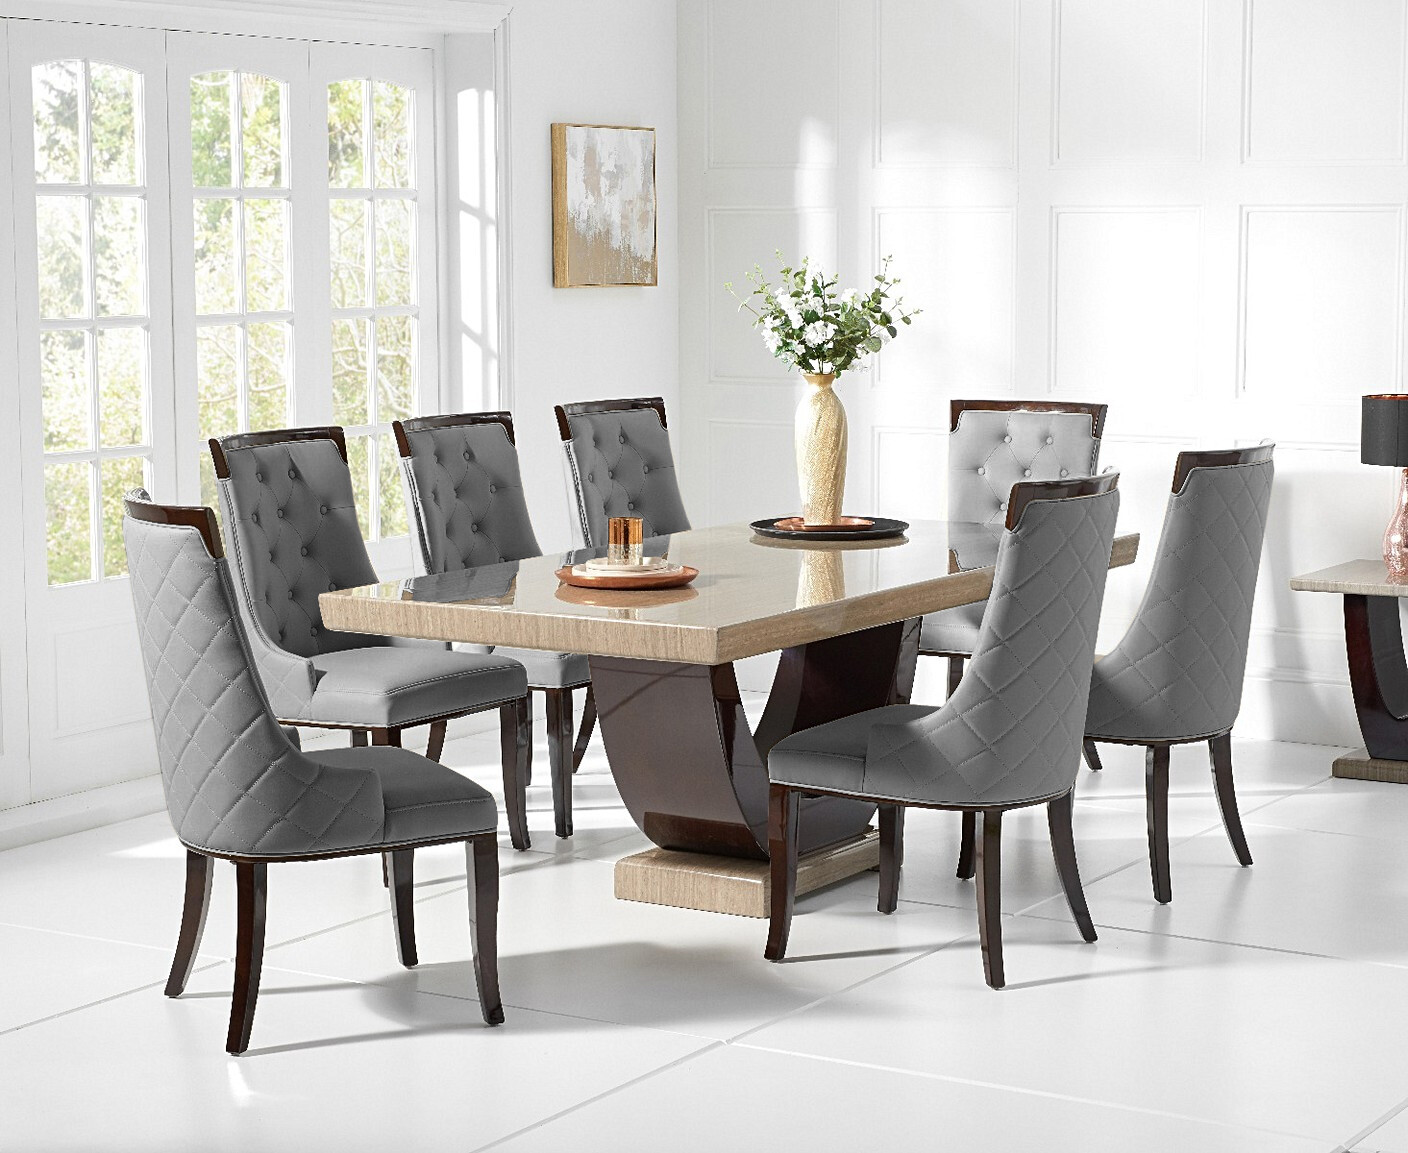 Photo 3 of Novara 200cm brown pedestal marble dining table with 10 grey francesca chairs